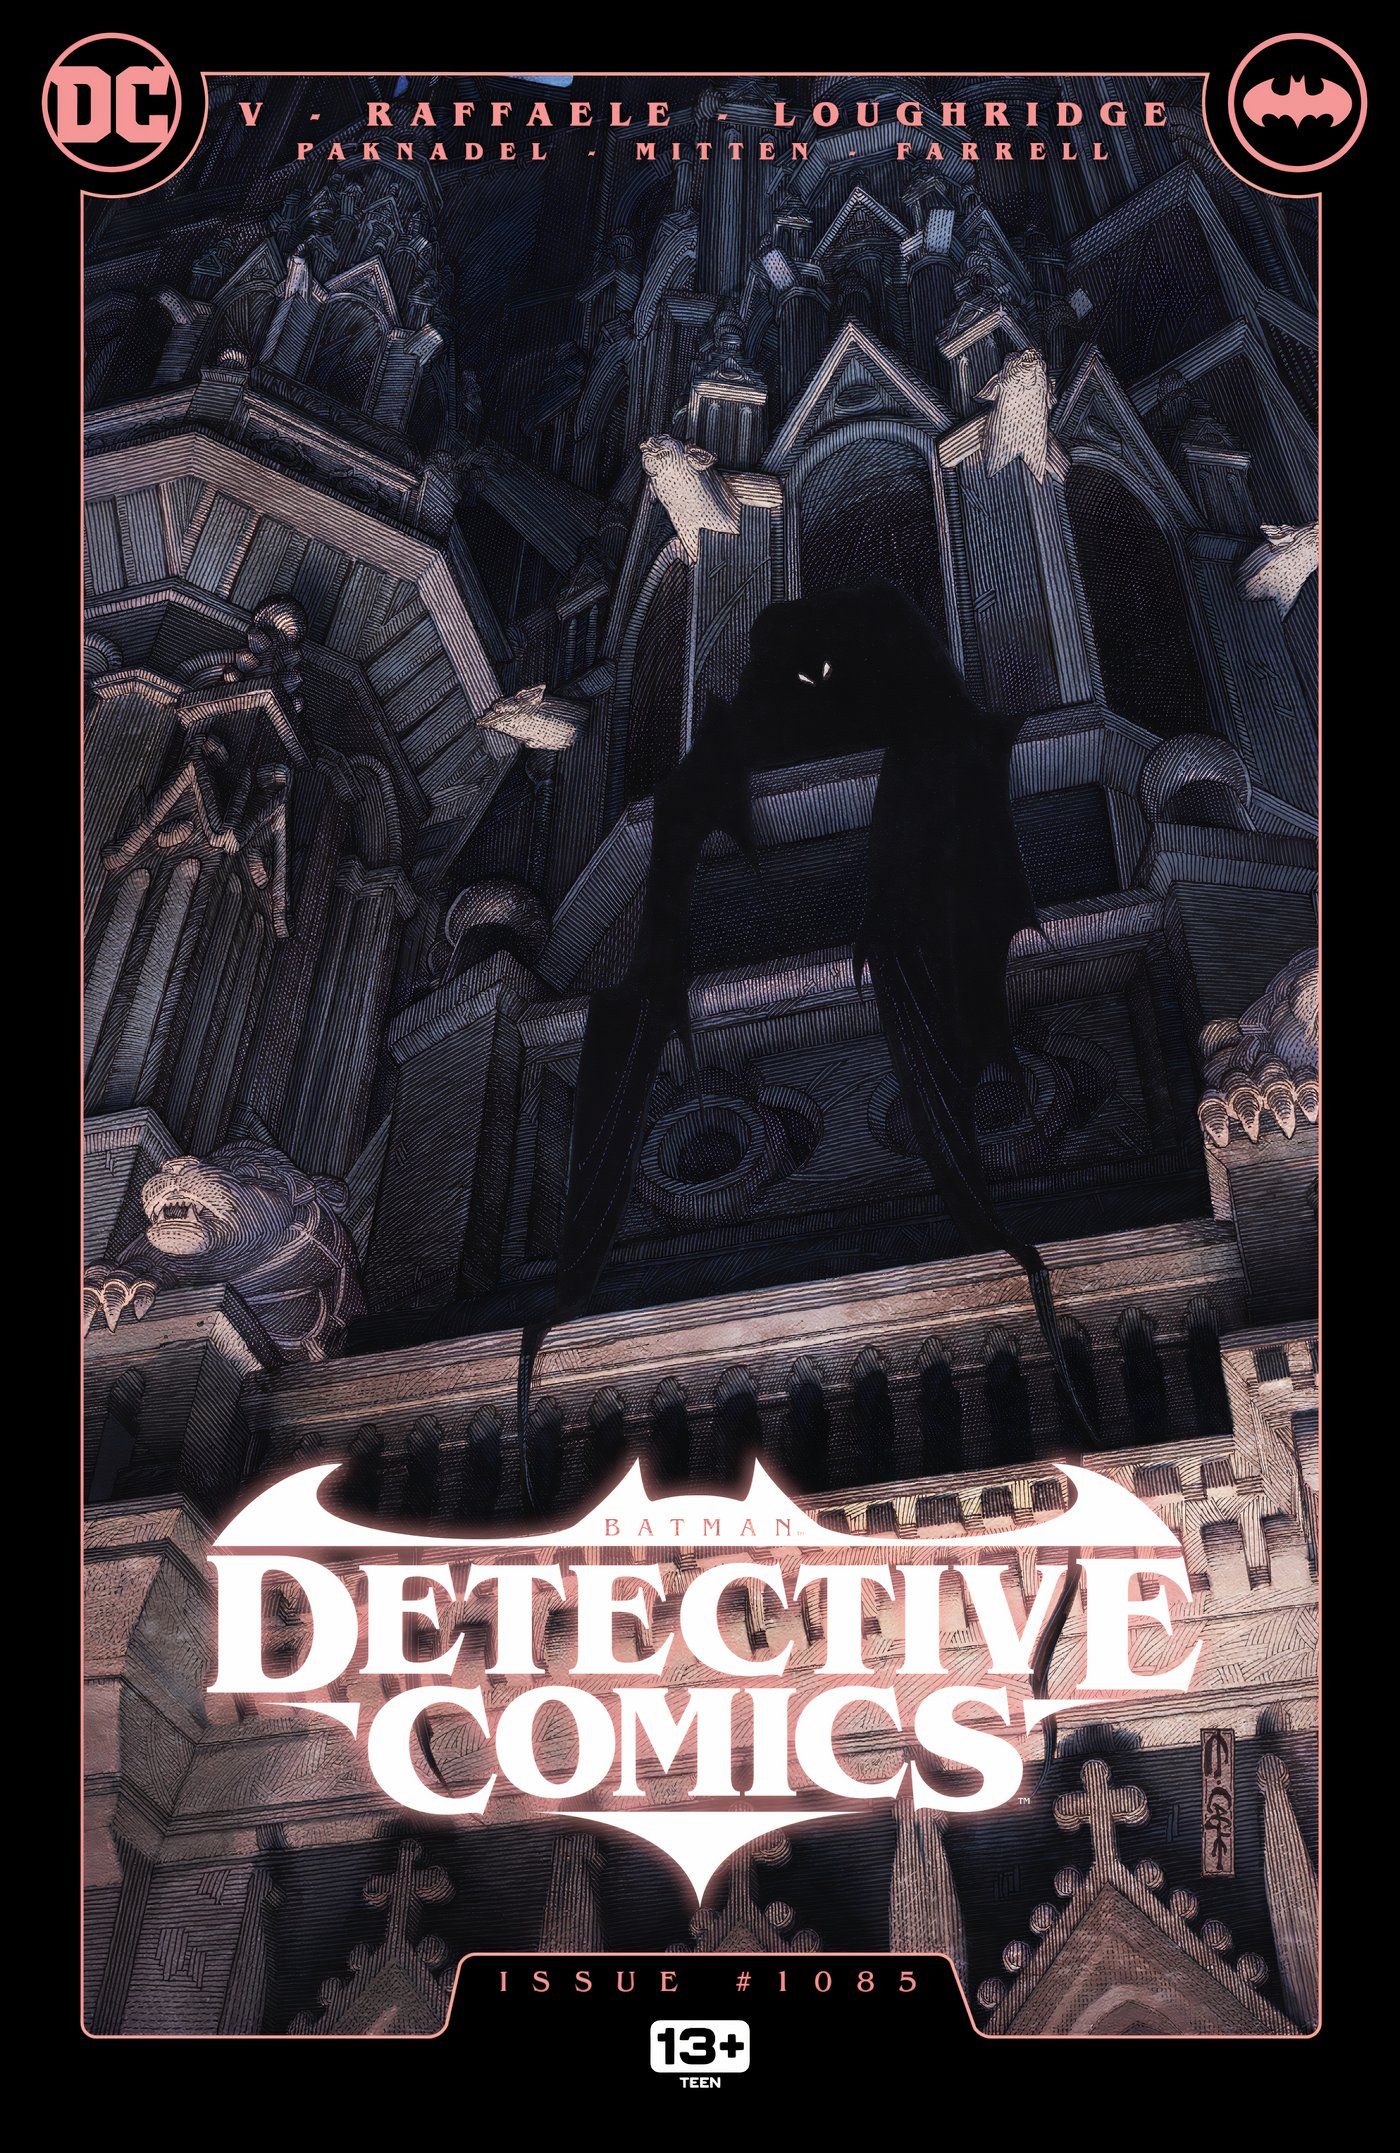 Detective Comics 1085 Main Cover: the shadow of Batman hangs from the rafter of a gothic building.